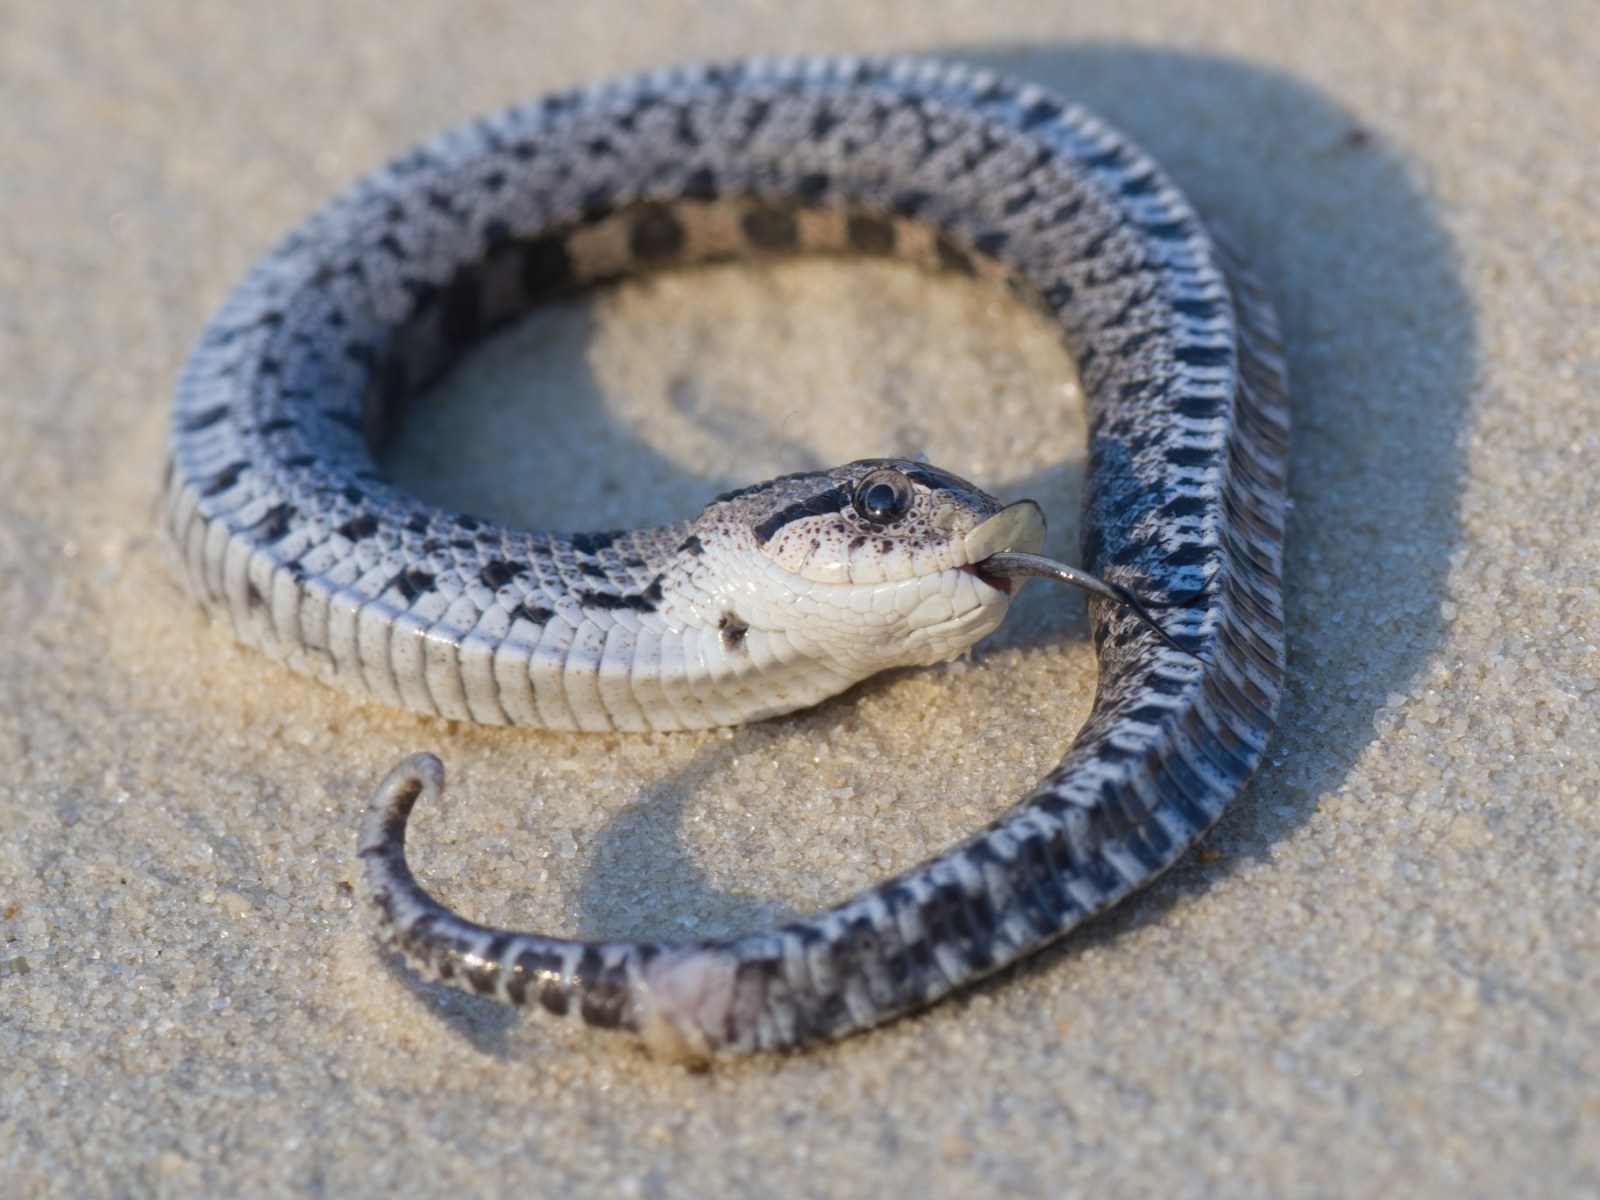 North Carolina Zoo on X: A snake playing possum? Eastern hognose snakes  play dead as a defense mechanism called thanatosis. Hognoses write around  before opening their mouth & letting their tongue hang